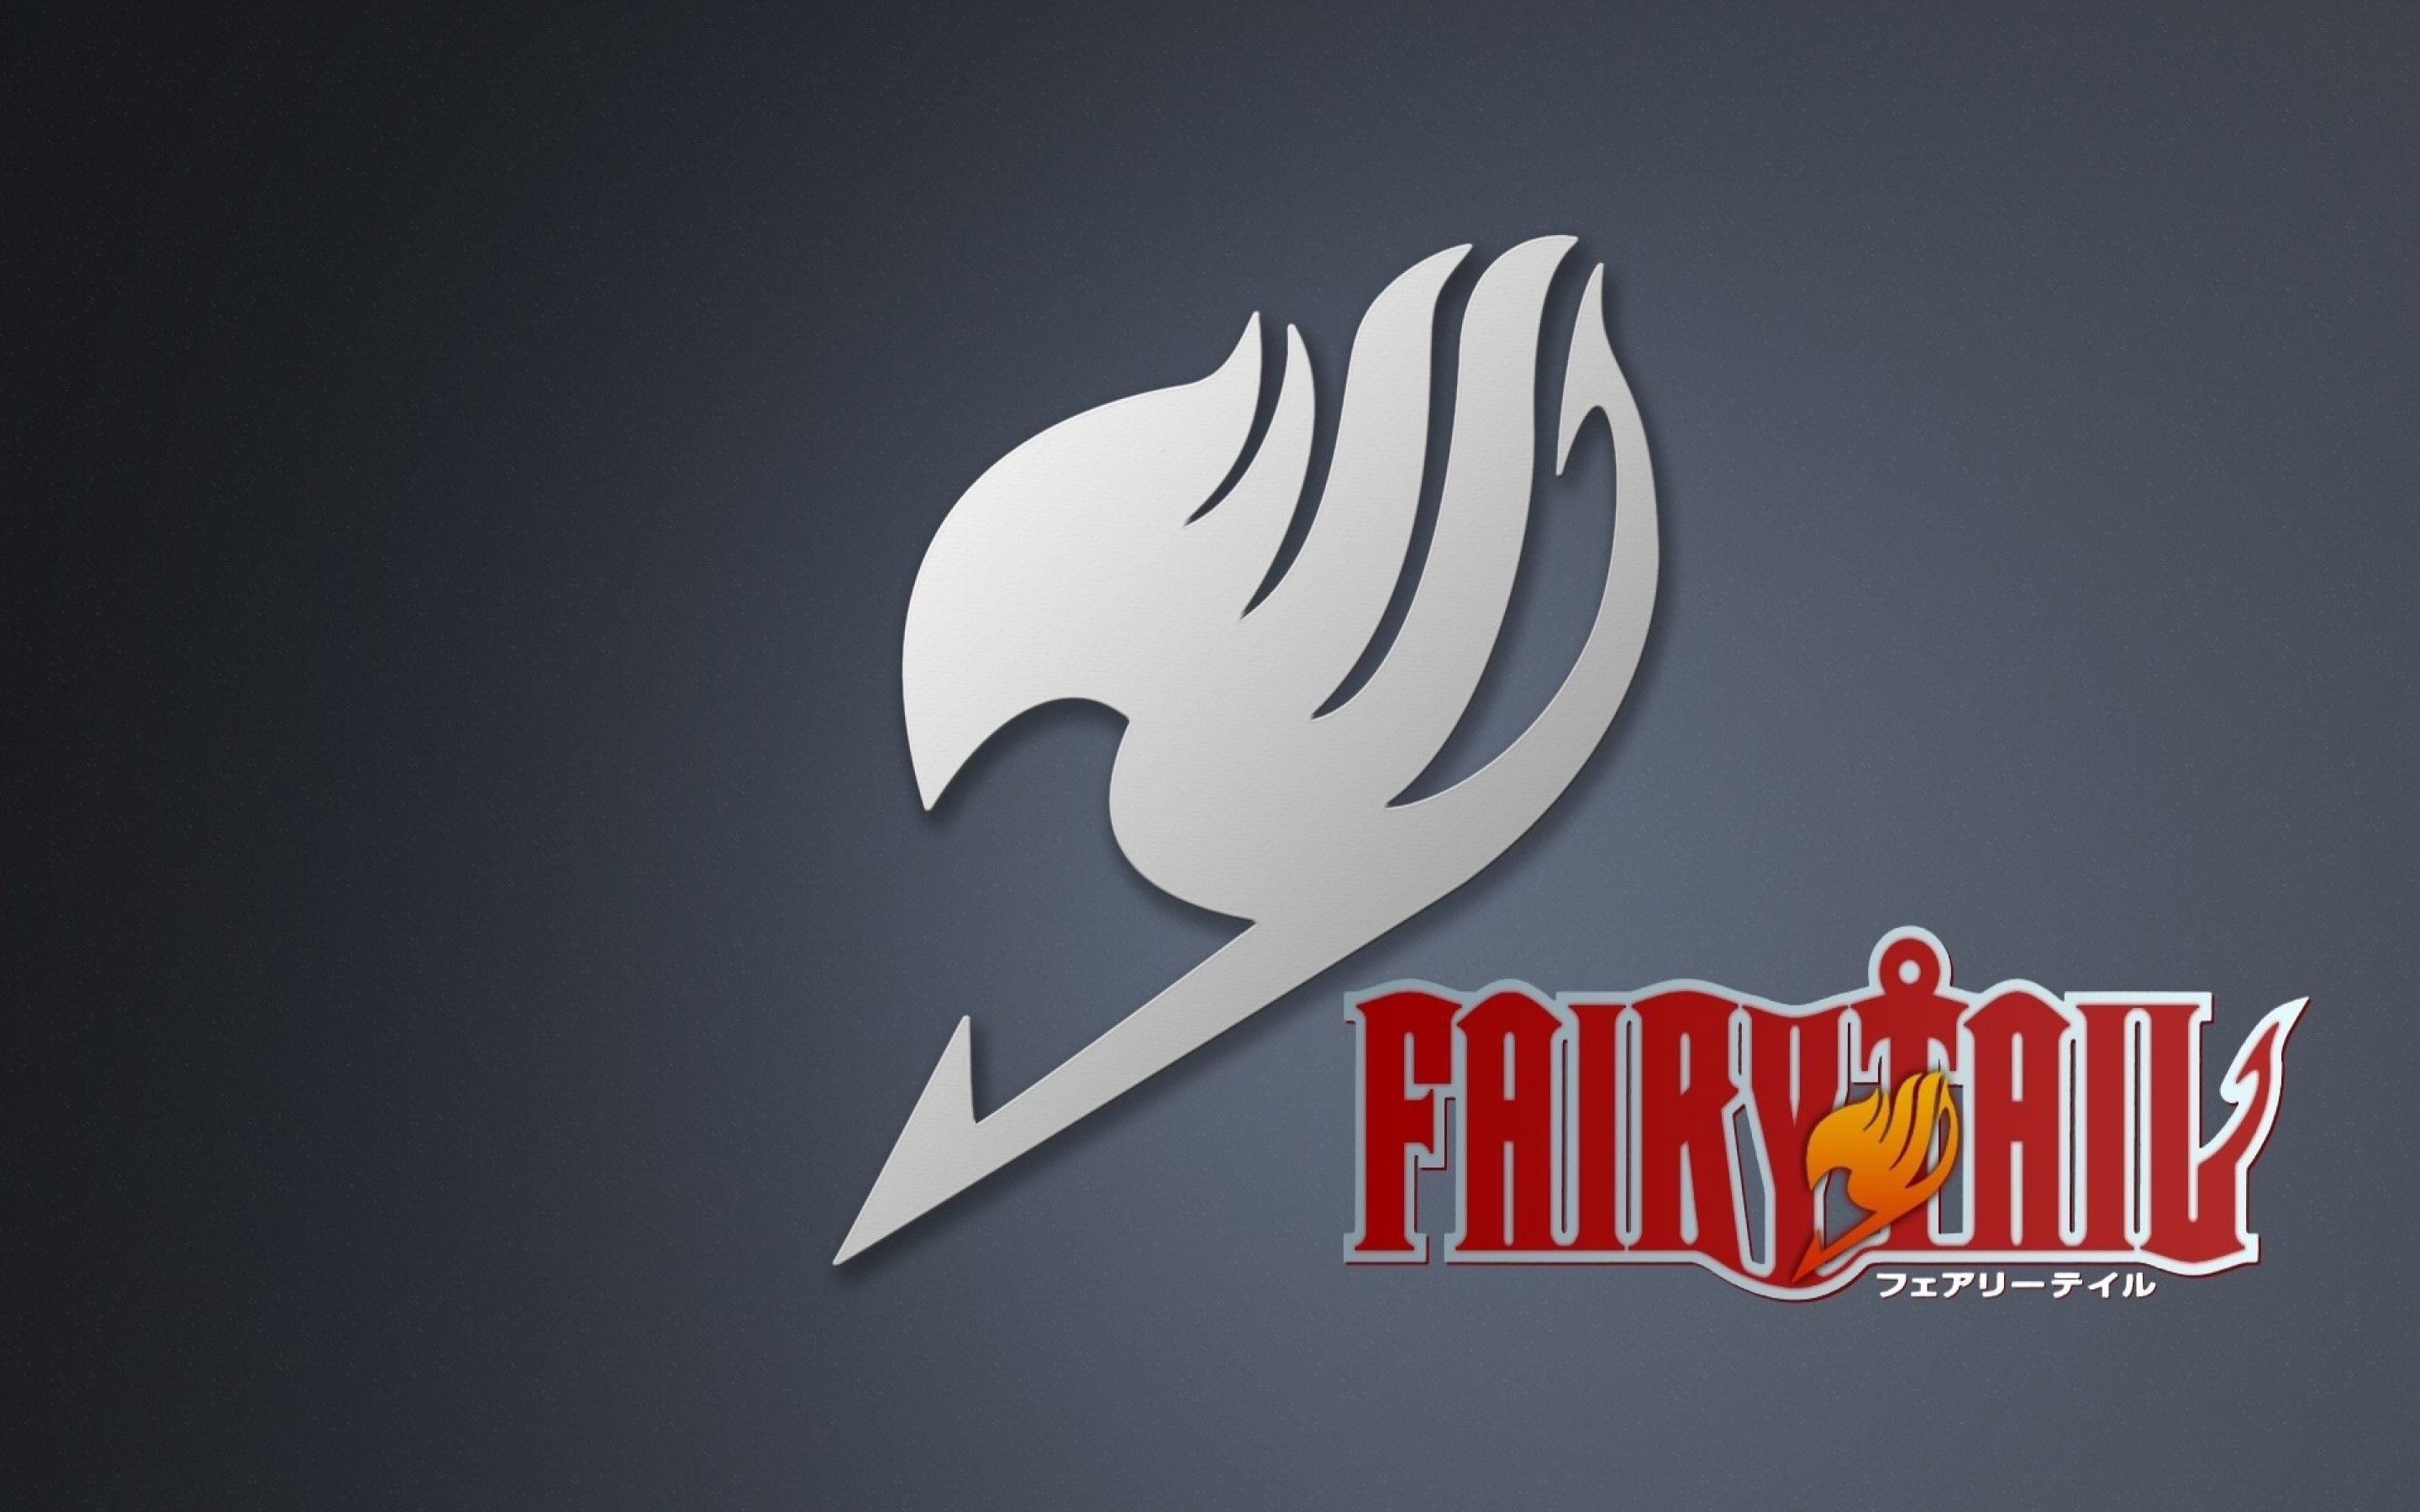 2880x1800 Fairy Tail Logo T Shirts amp Hoodies by zijing Redbubble - HD Wallpapers